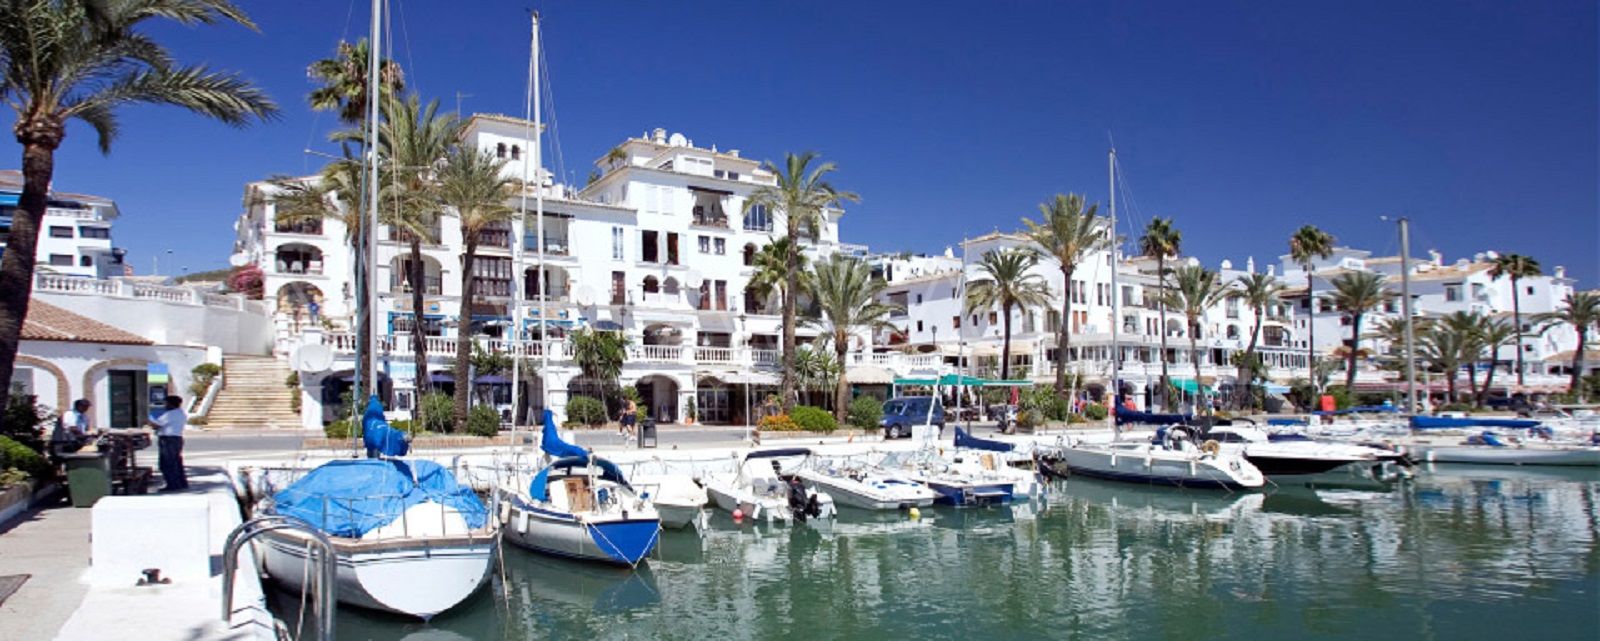 Wohnung for sale in Estepona Old Town